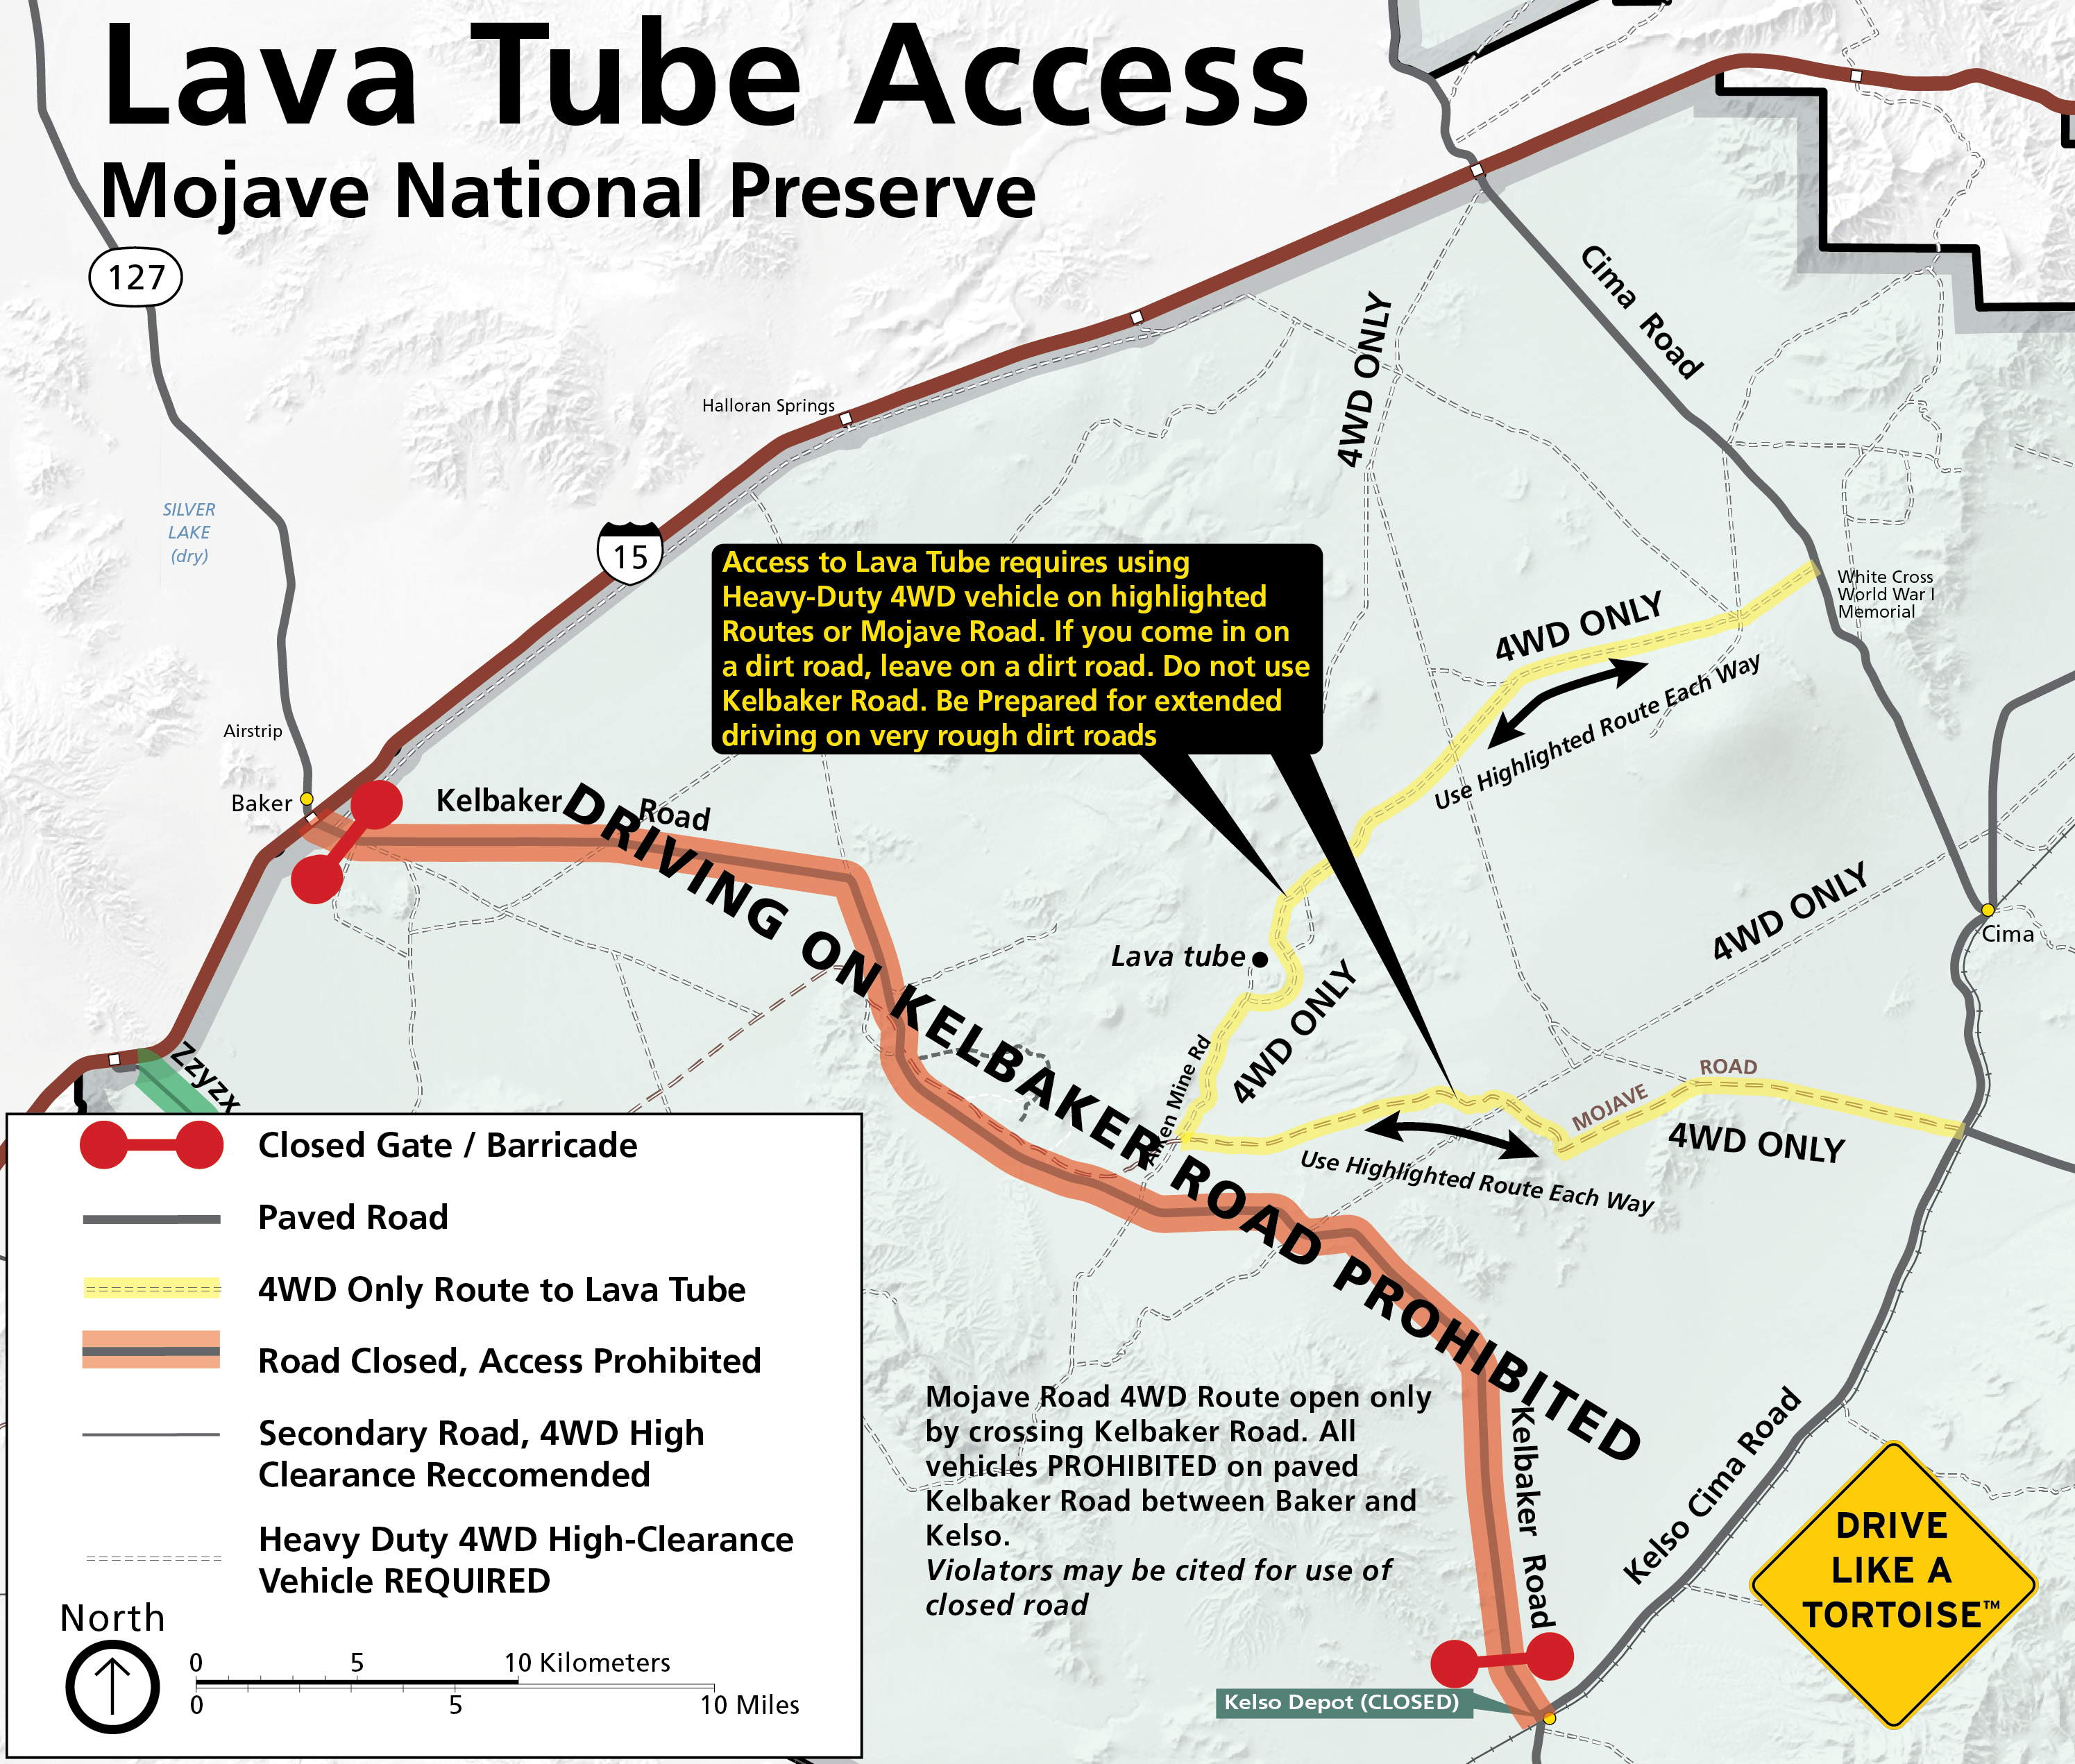 Map of Lava Tube Area highlighting alternate routes of access along Valley View, Aiken Mine, and Mojave Roads. Text emphasizes Kelbaker Road closed, and heavy duty four wheel drive is required to access Lava Tube.